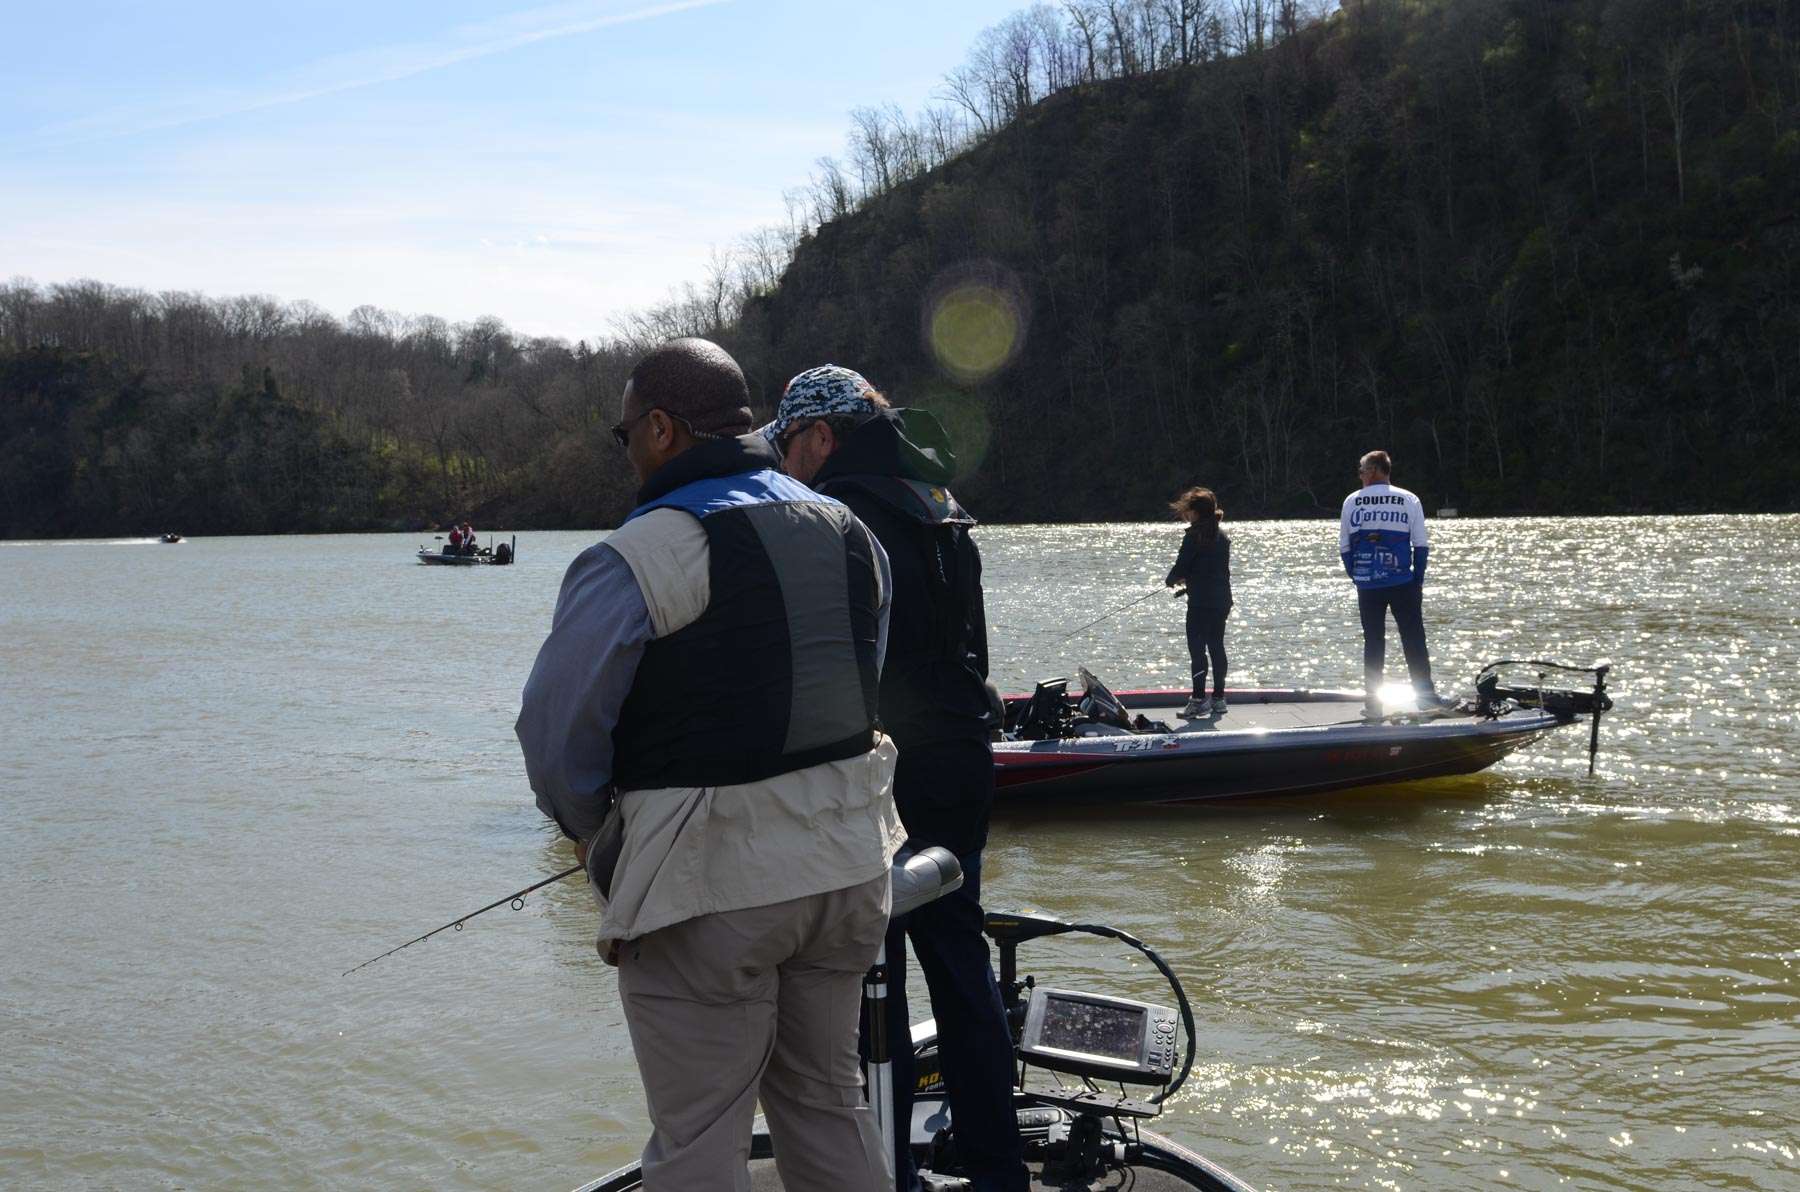 While Gov. Bill Lee was officially opening the Bassmaster Classic Outdoors Expo  his wife  Maria  enjoyed a quick fishing outing and tour of the river

